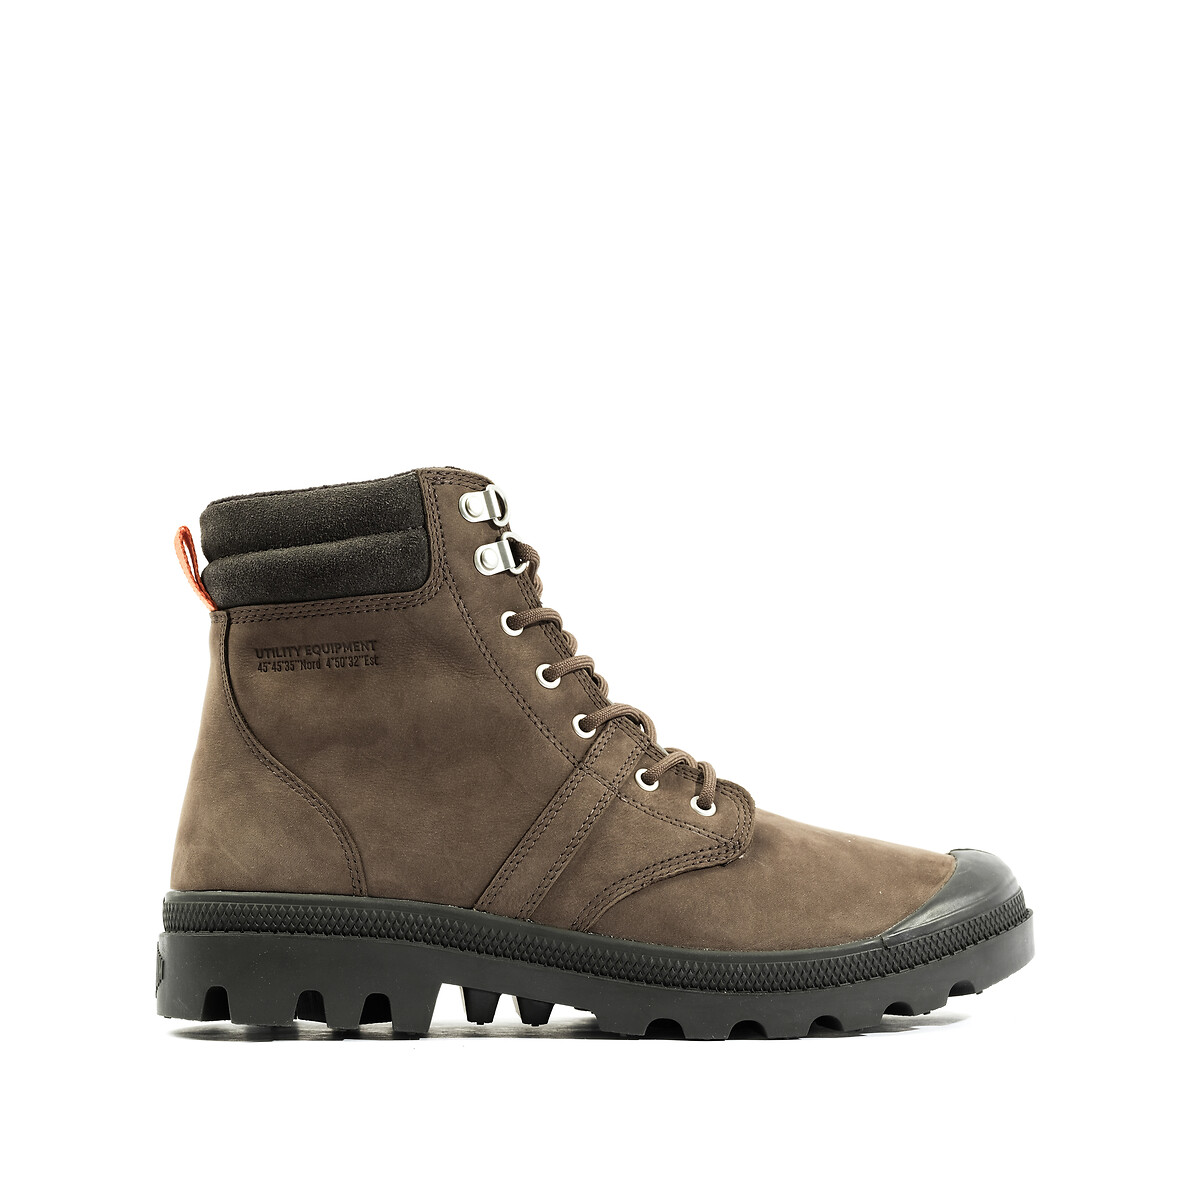 Pallabrousse Hiking Boots in Leather